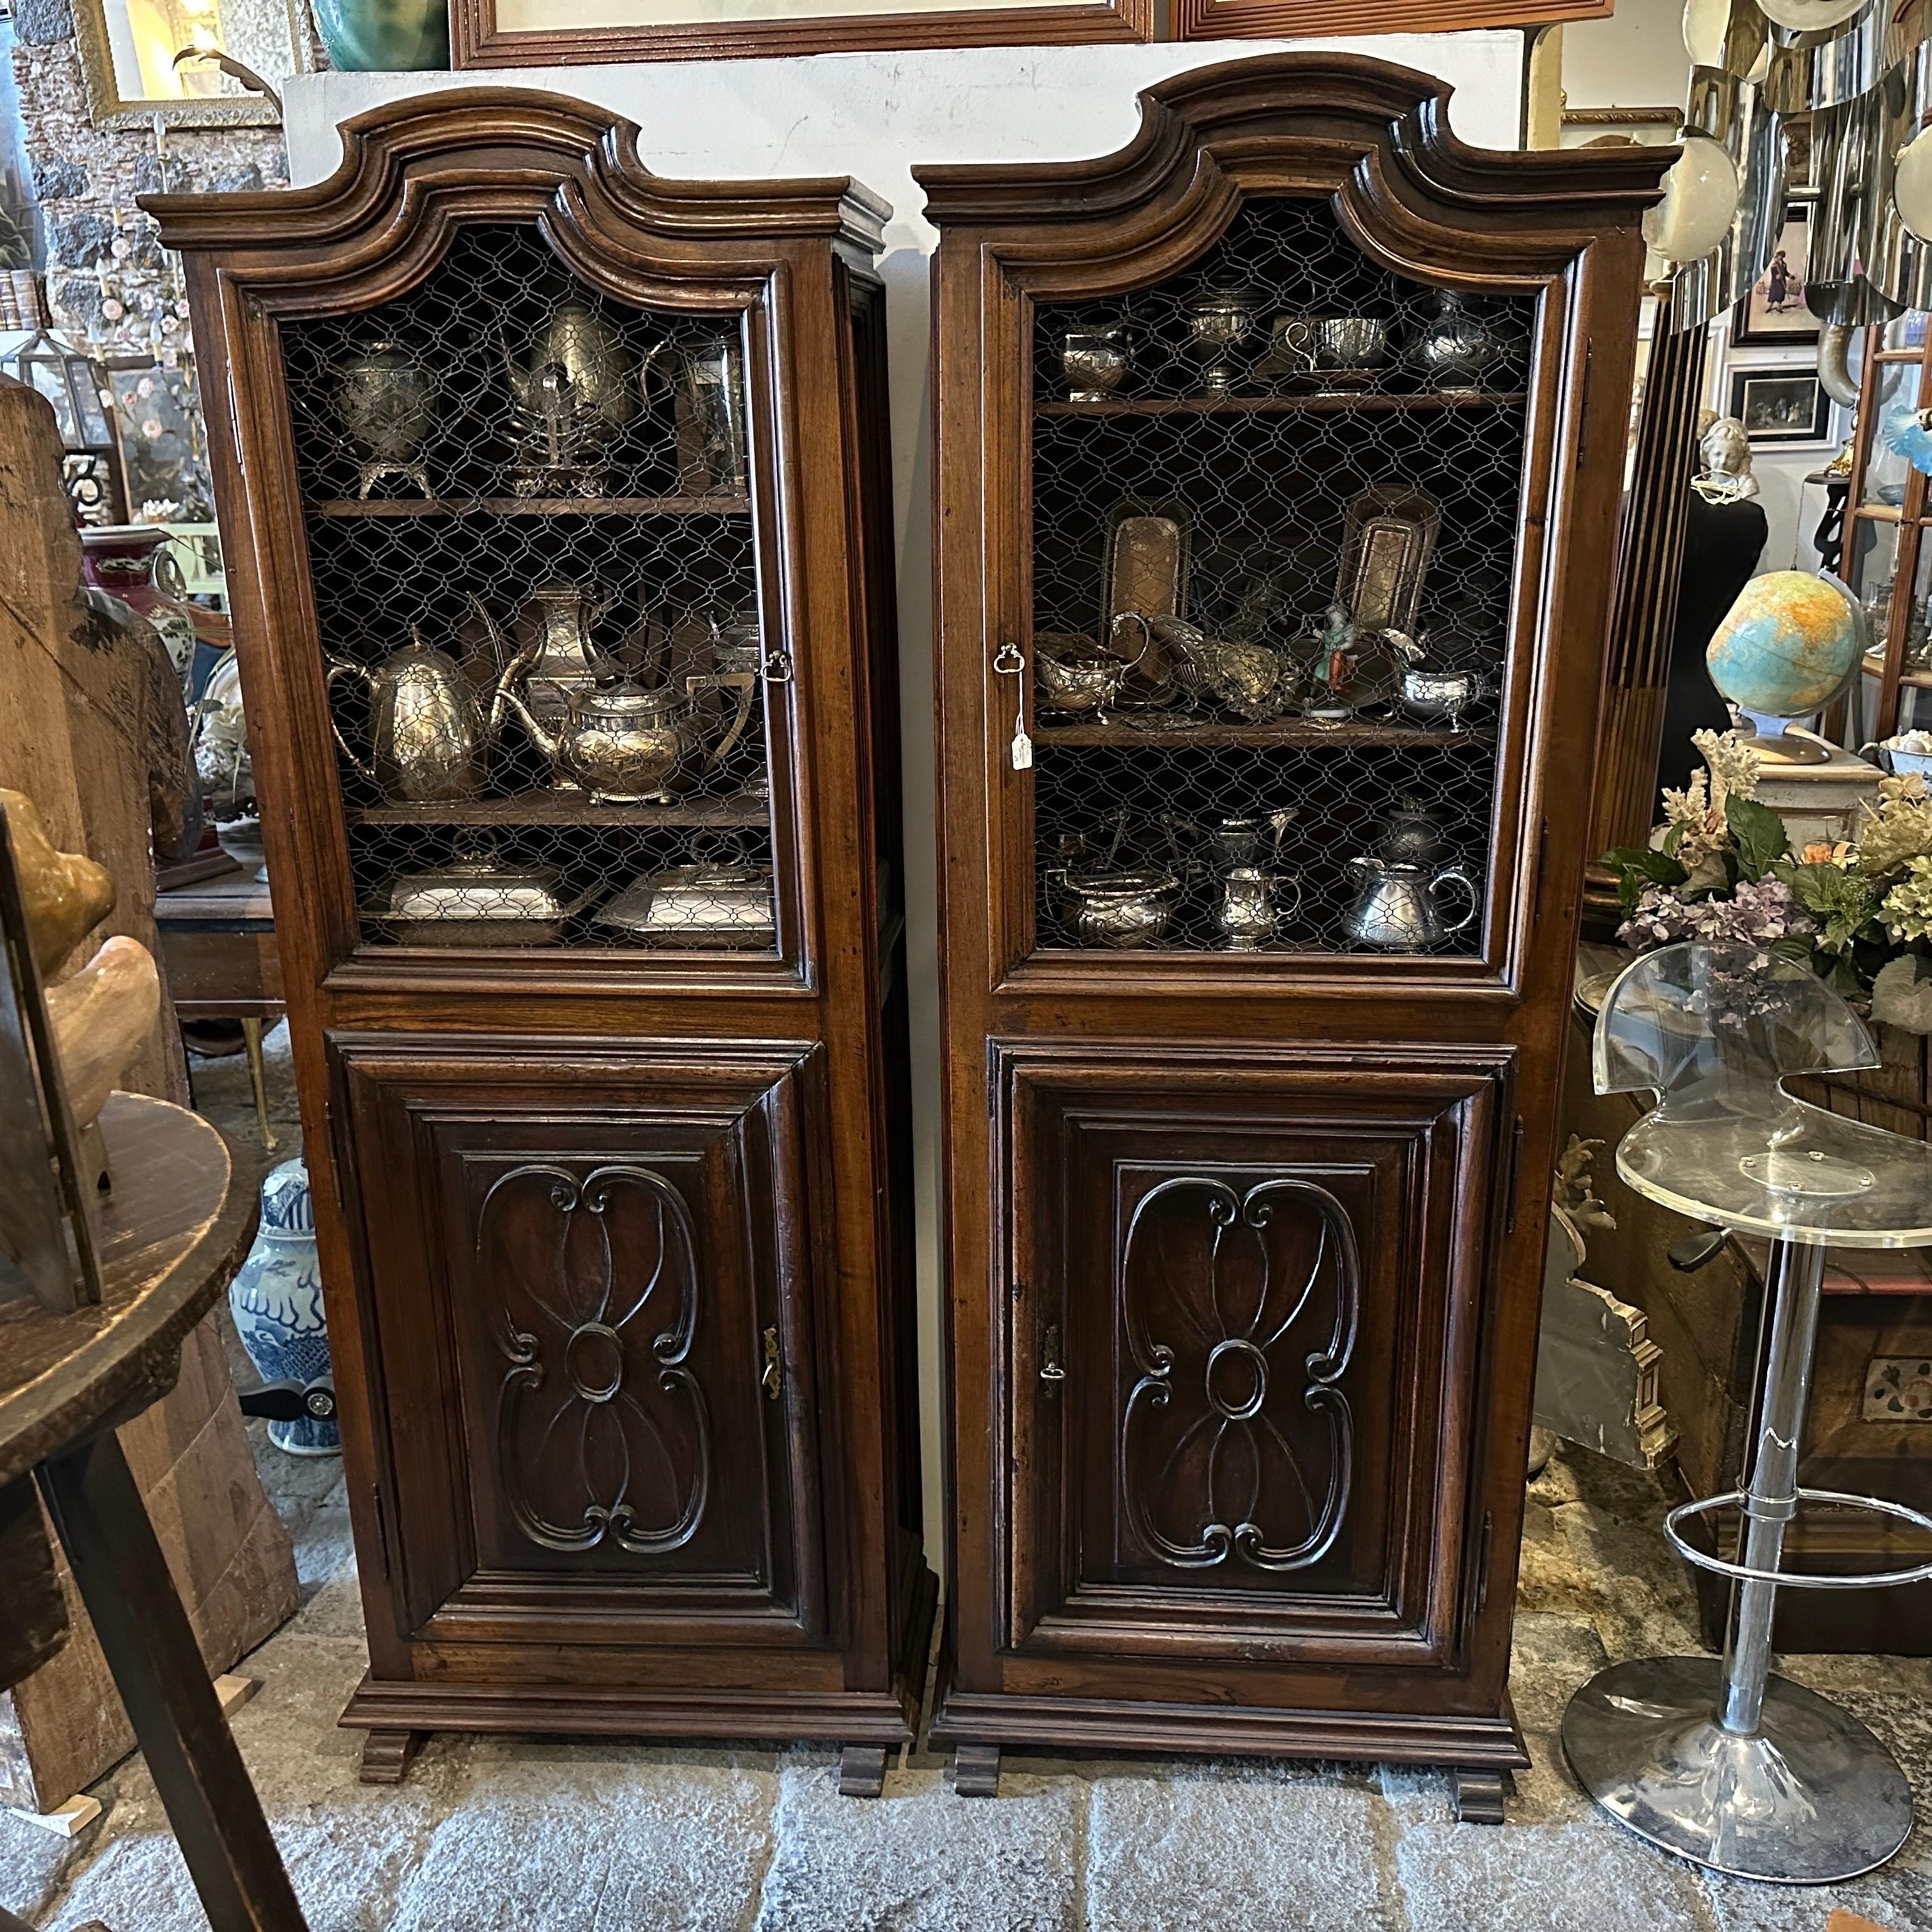 These High Hand-carved Walnut Wood Italian Credenzas arecexquisite examples of craftsmanship from that era. In the Late Louis XVI style, in Italian called Maria Antonietta style, the two pieces of furniture are characterized by elegance, refinement,